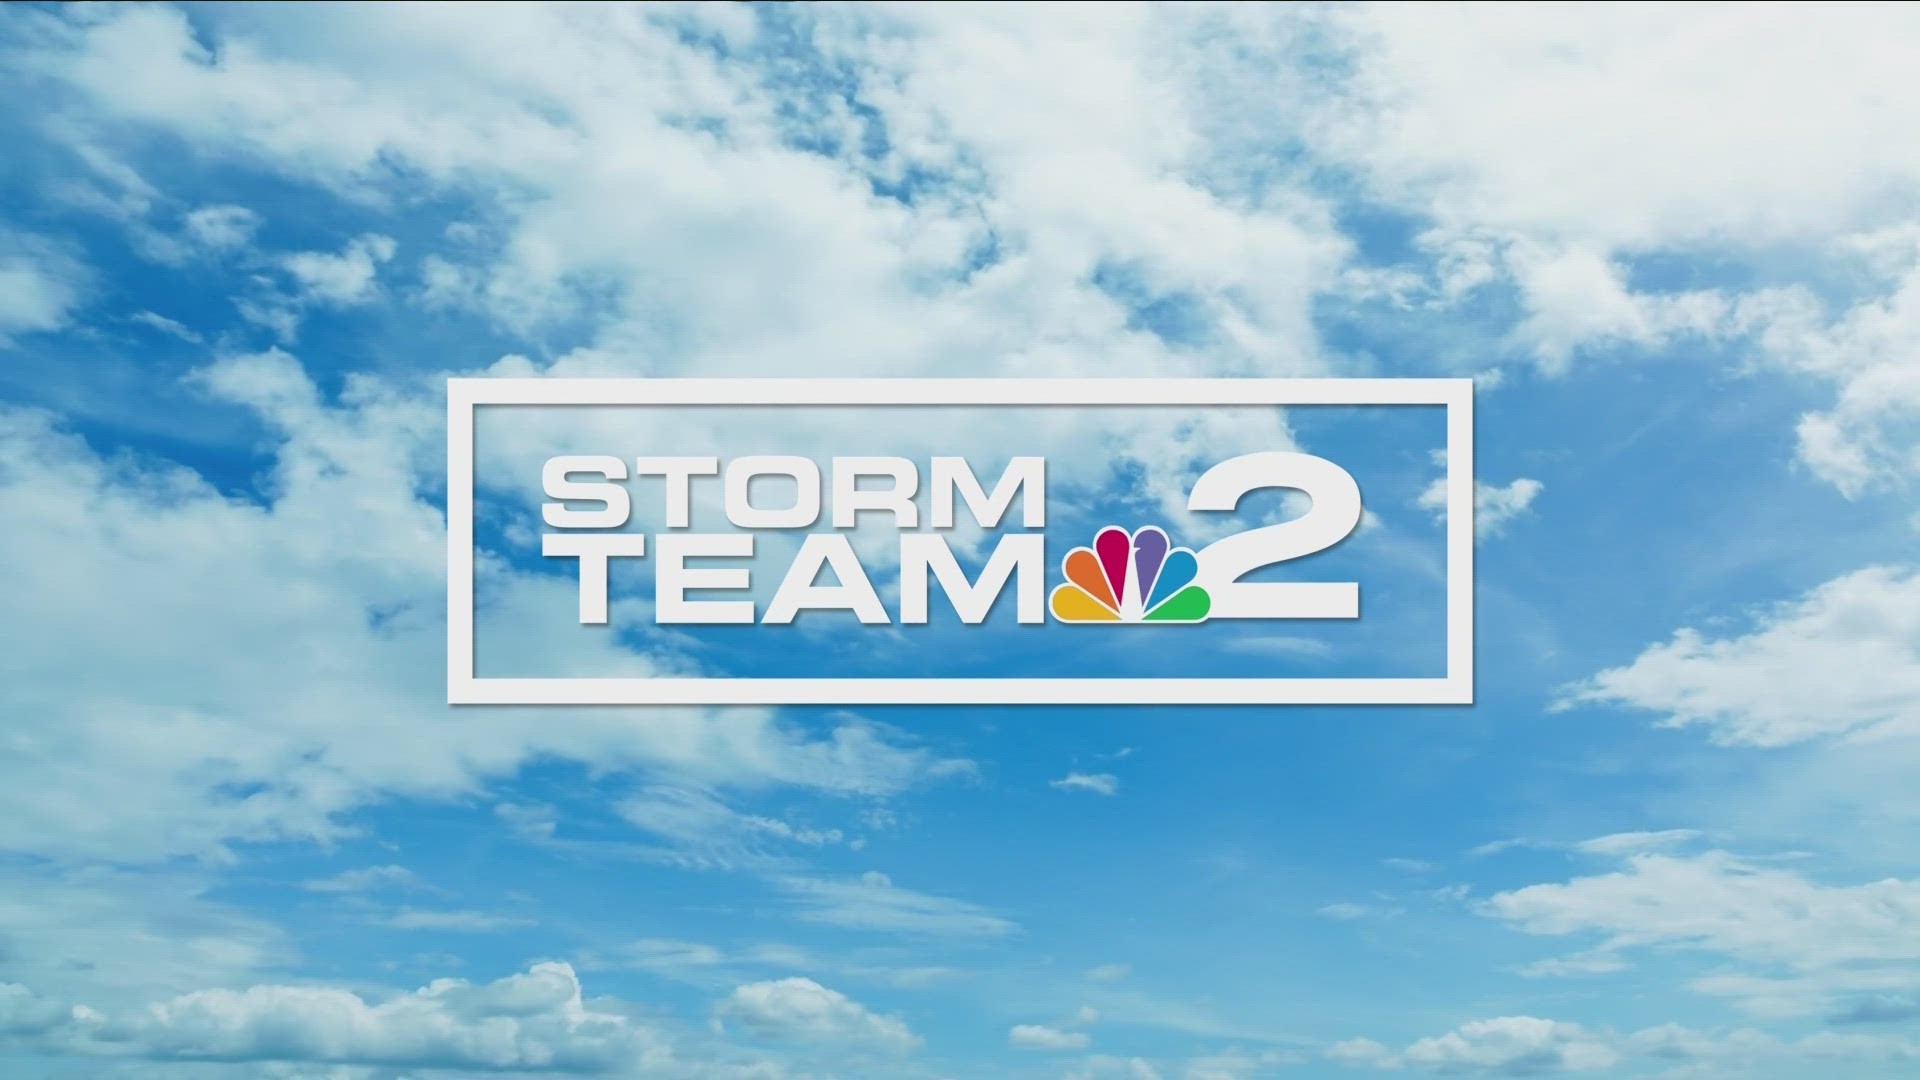 Storm Team 2 has your weather forecast with Kevin O'Neill for Sunday and Monday.